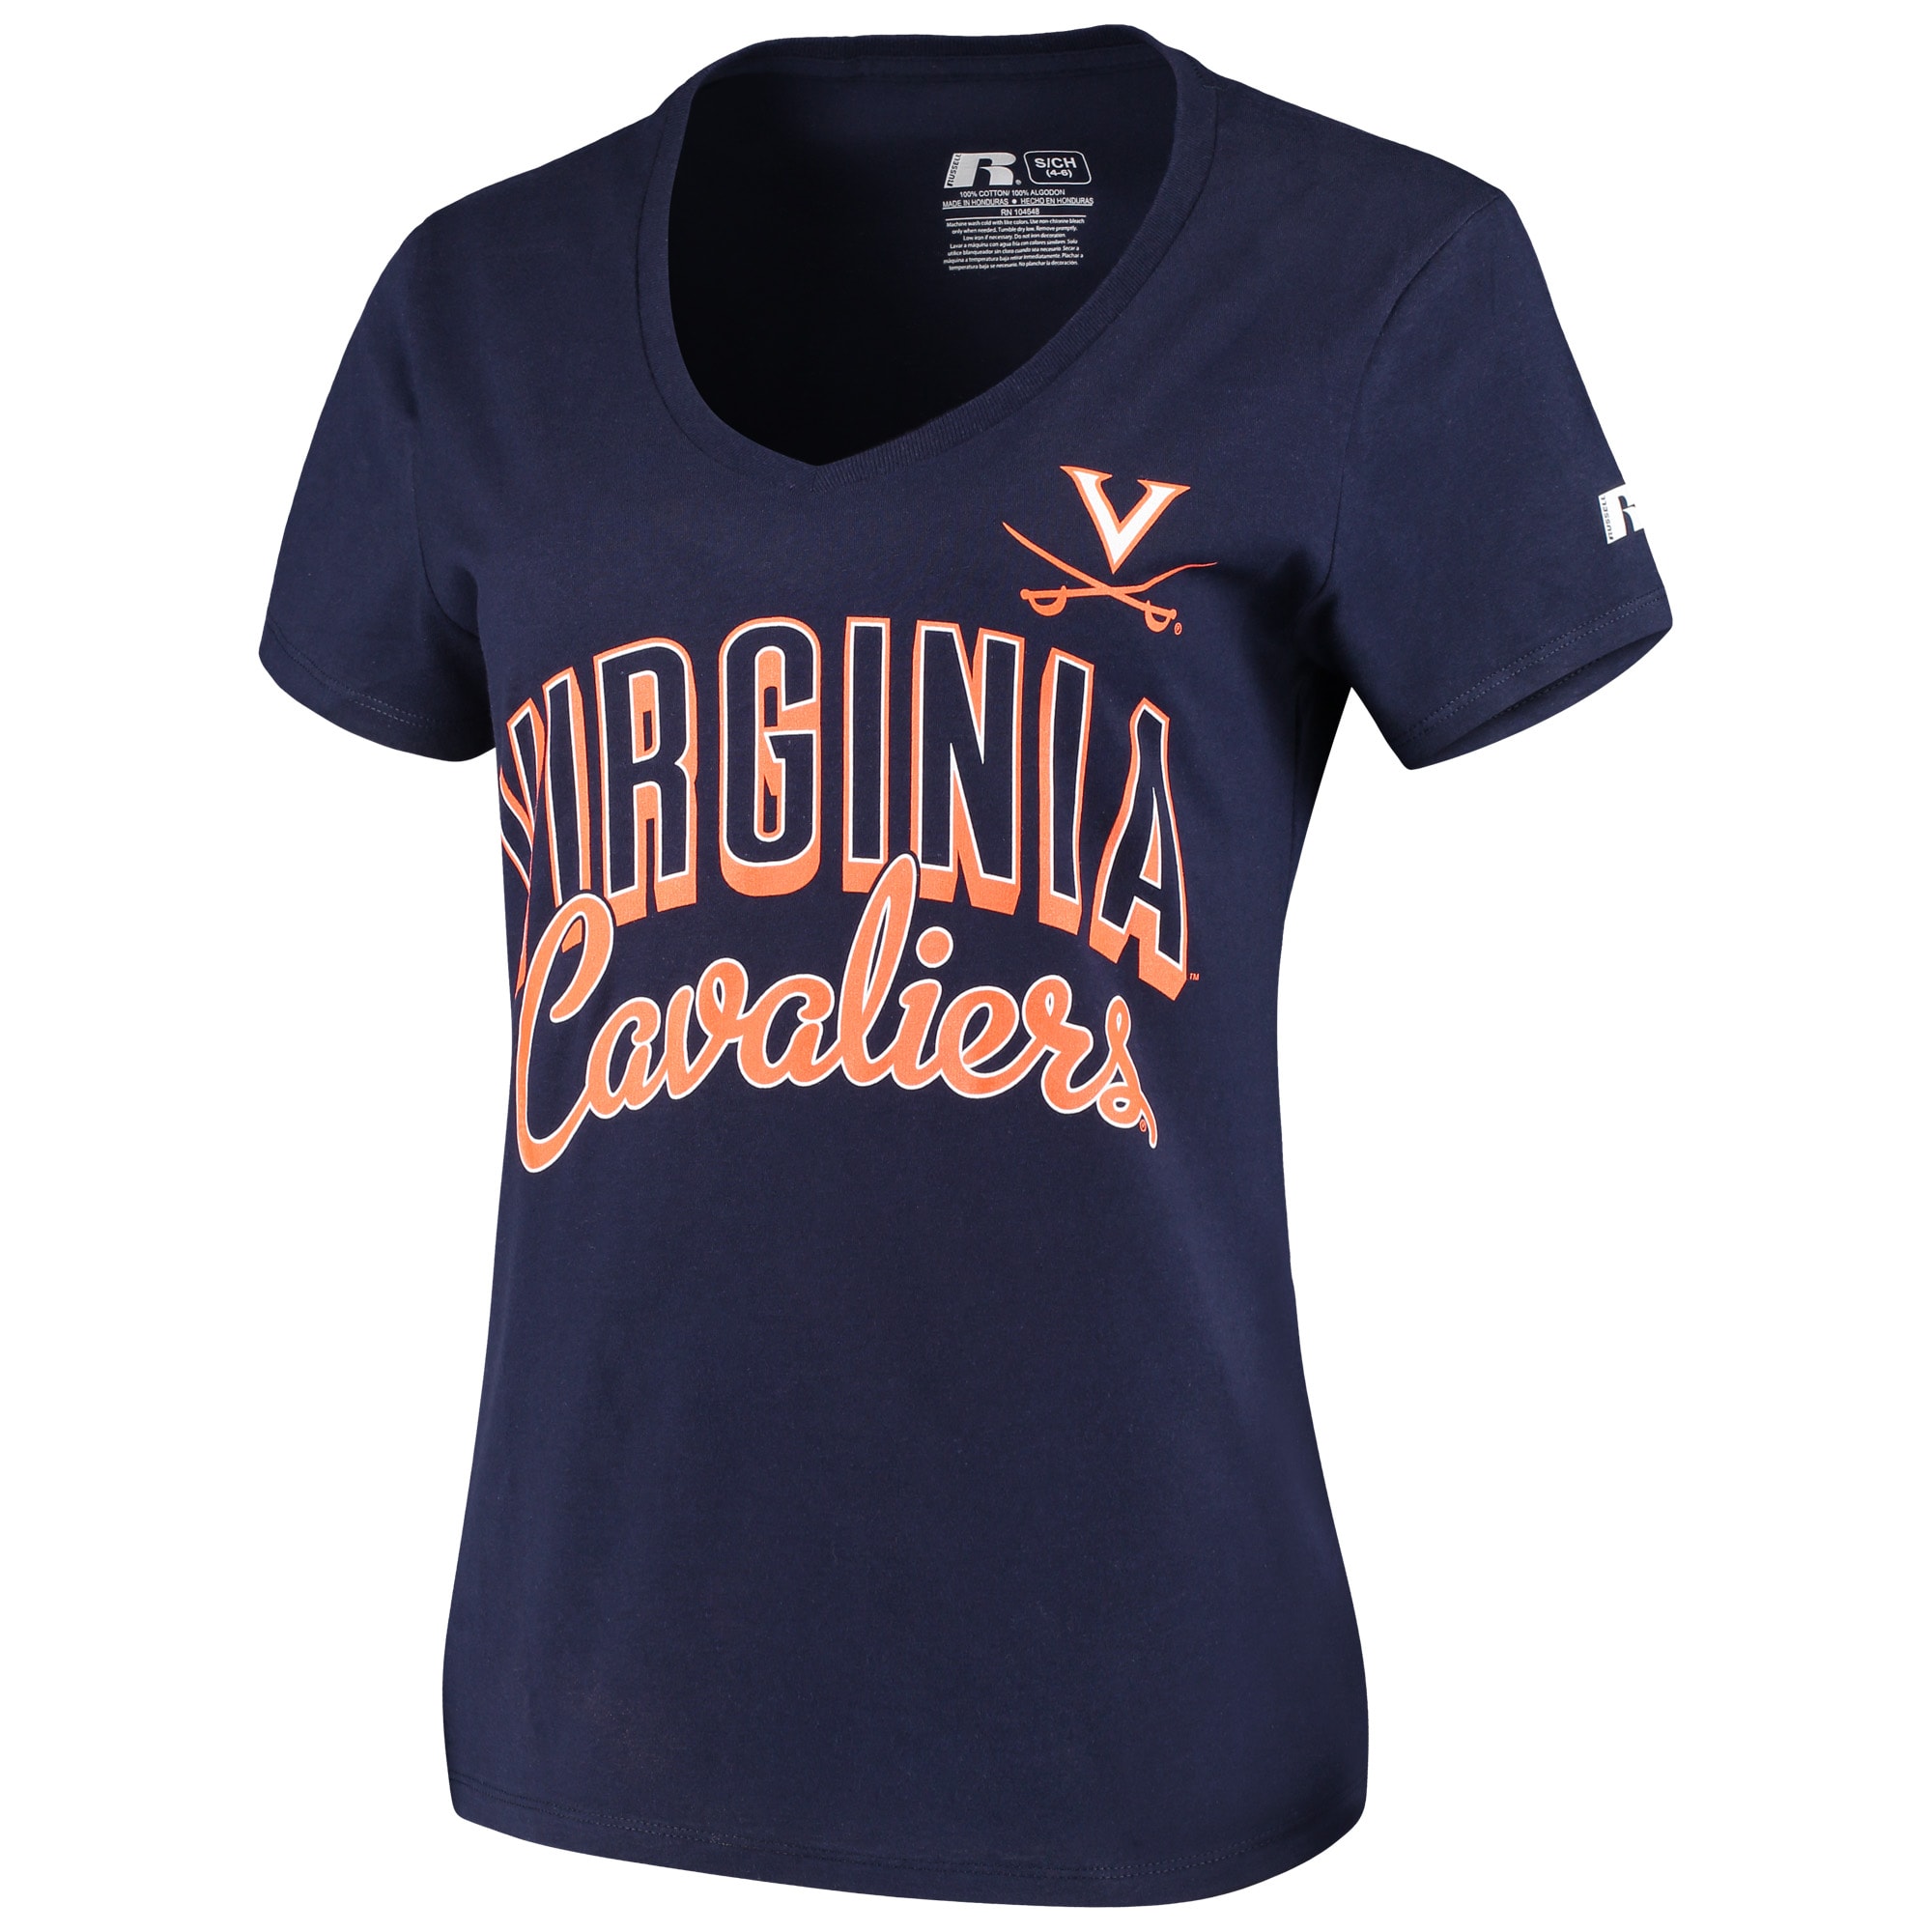 Virginia Cavaliers Russell Athletic Women's Arch V-Neck T-Shirt - Navy - image 2 of 3